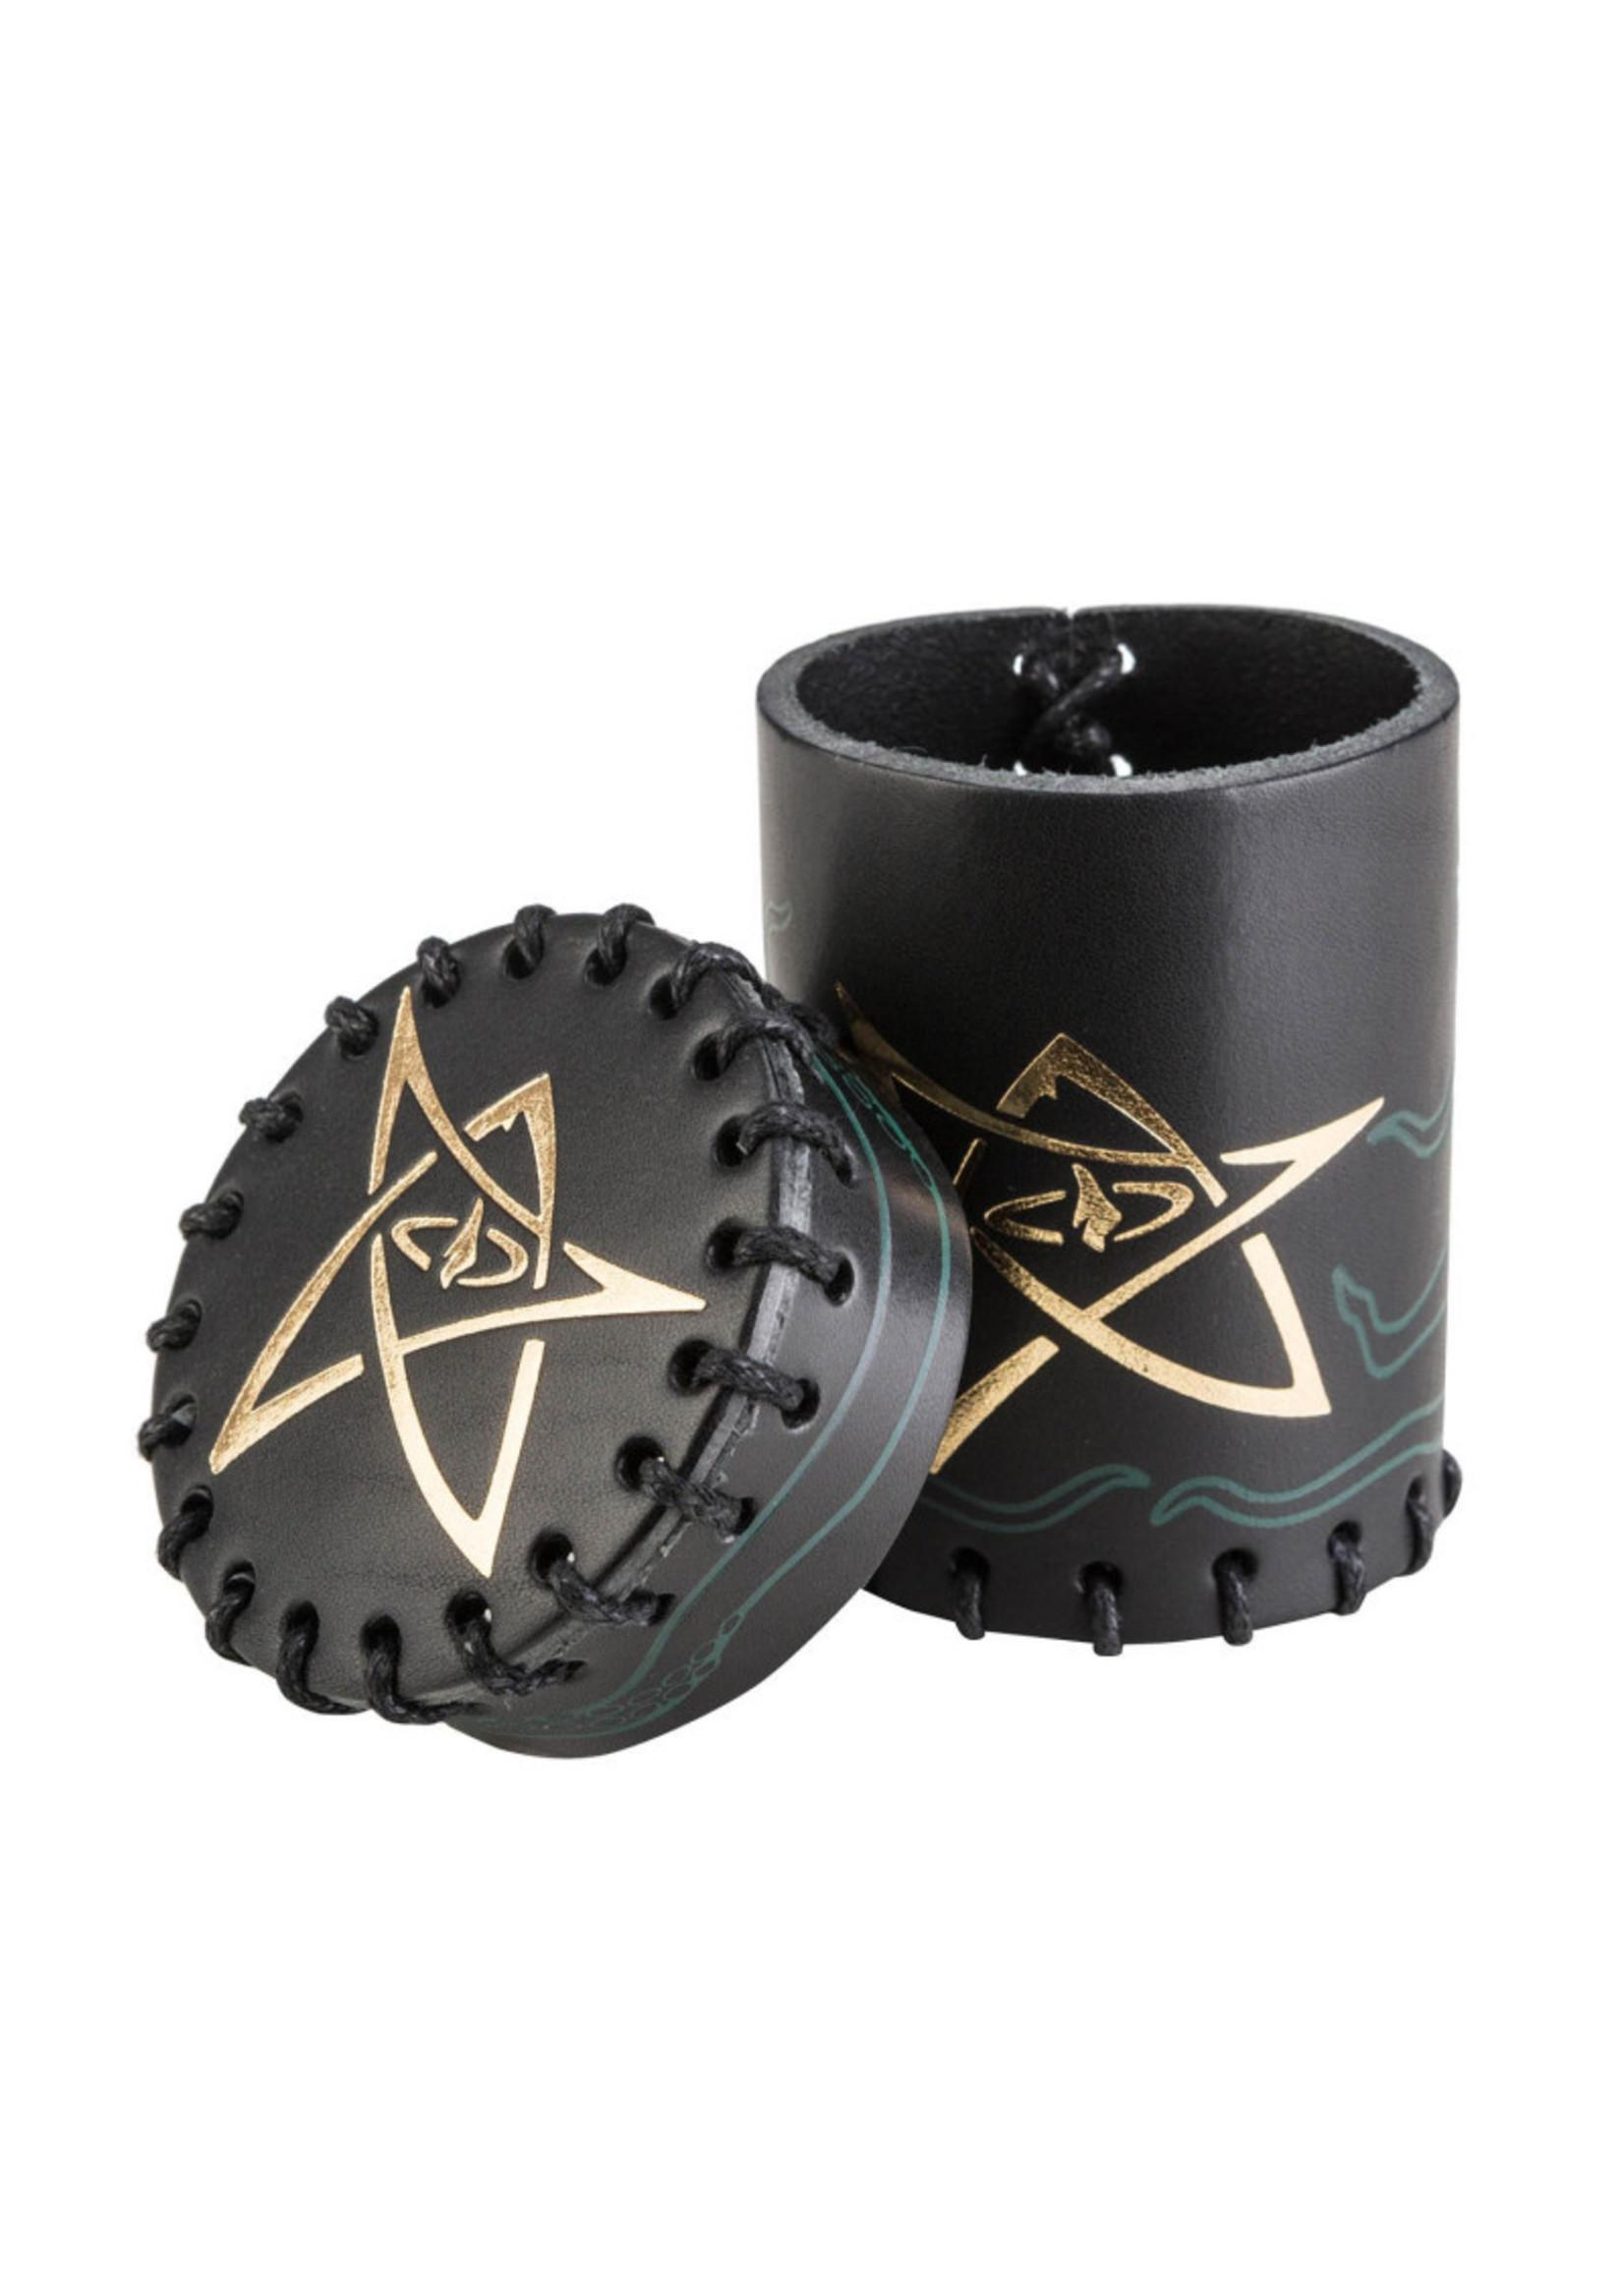 Call of Cthulhu Call Of Cthulhu: Dice Cup Black/Green With Gold Leather